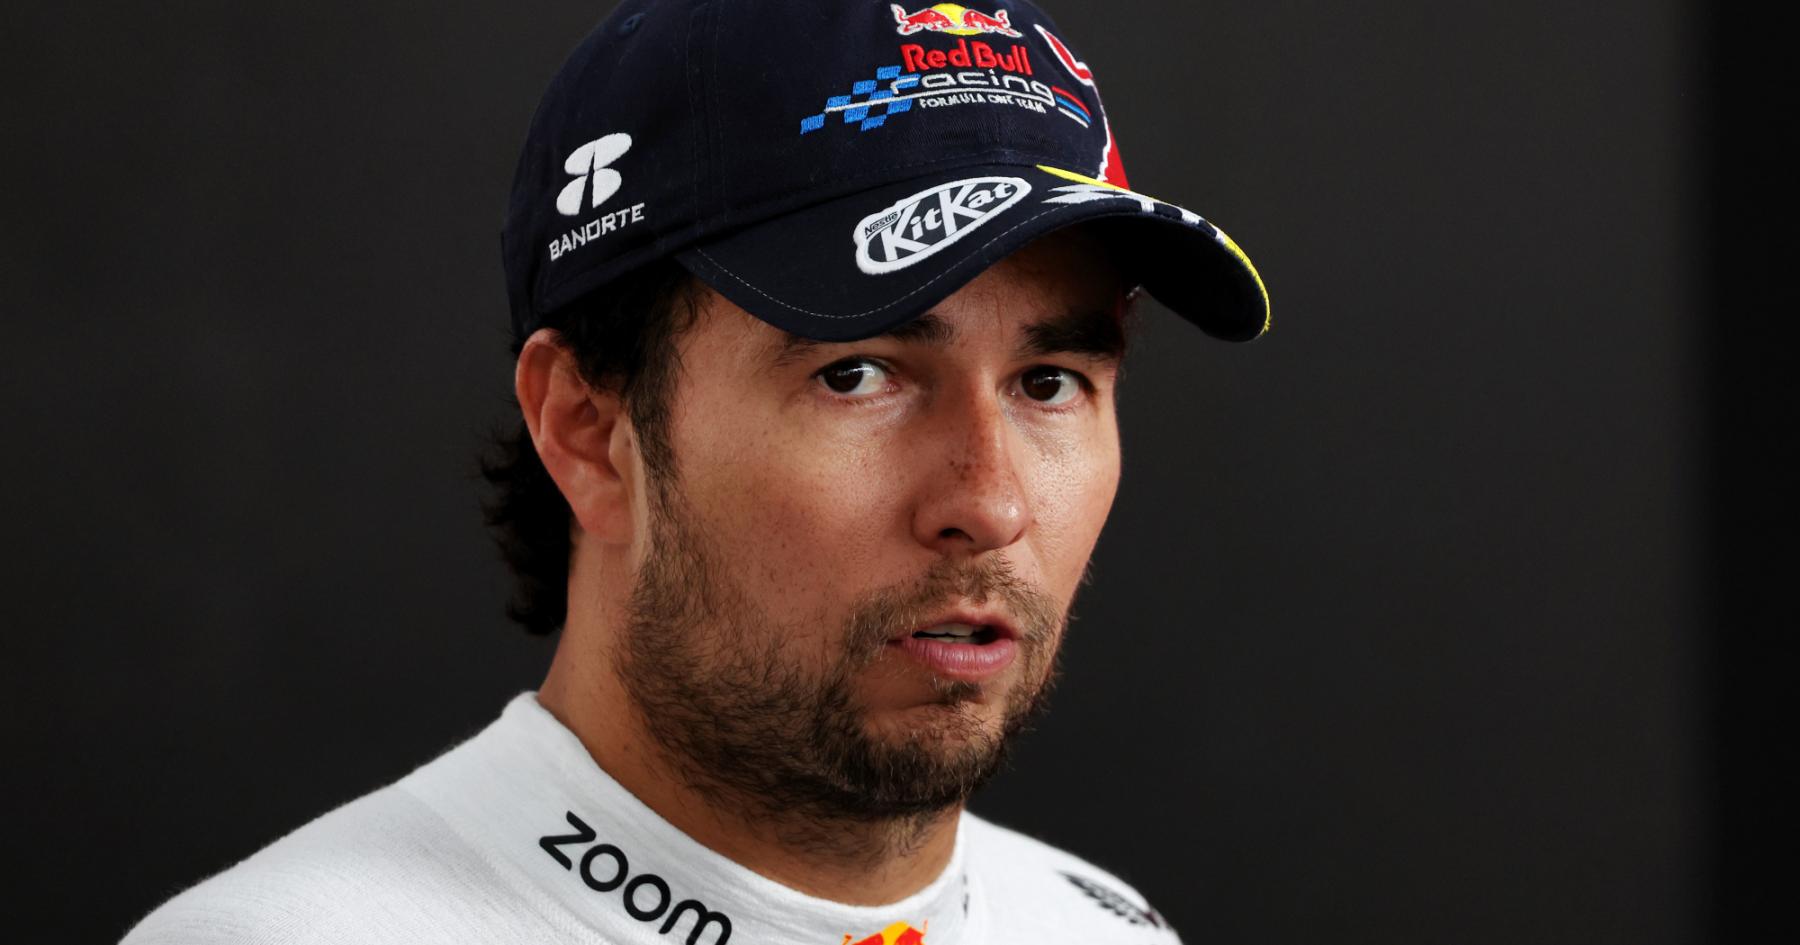 Racing Against the Odds: Perez's Defiant Stand in F1 Talks with Red Bull